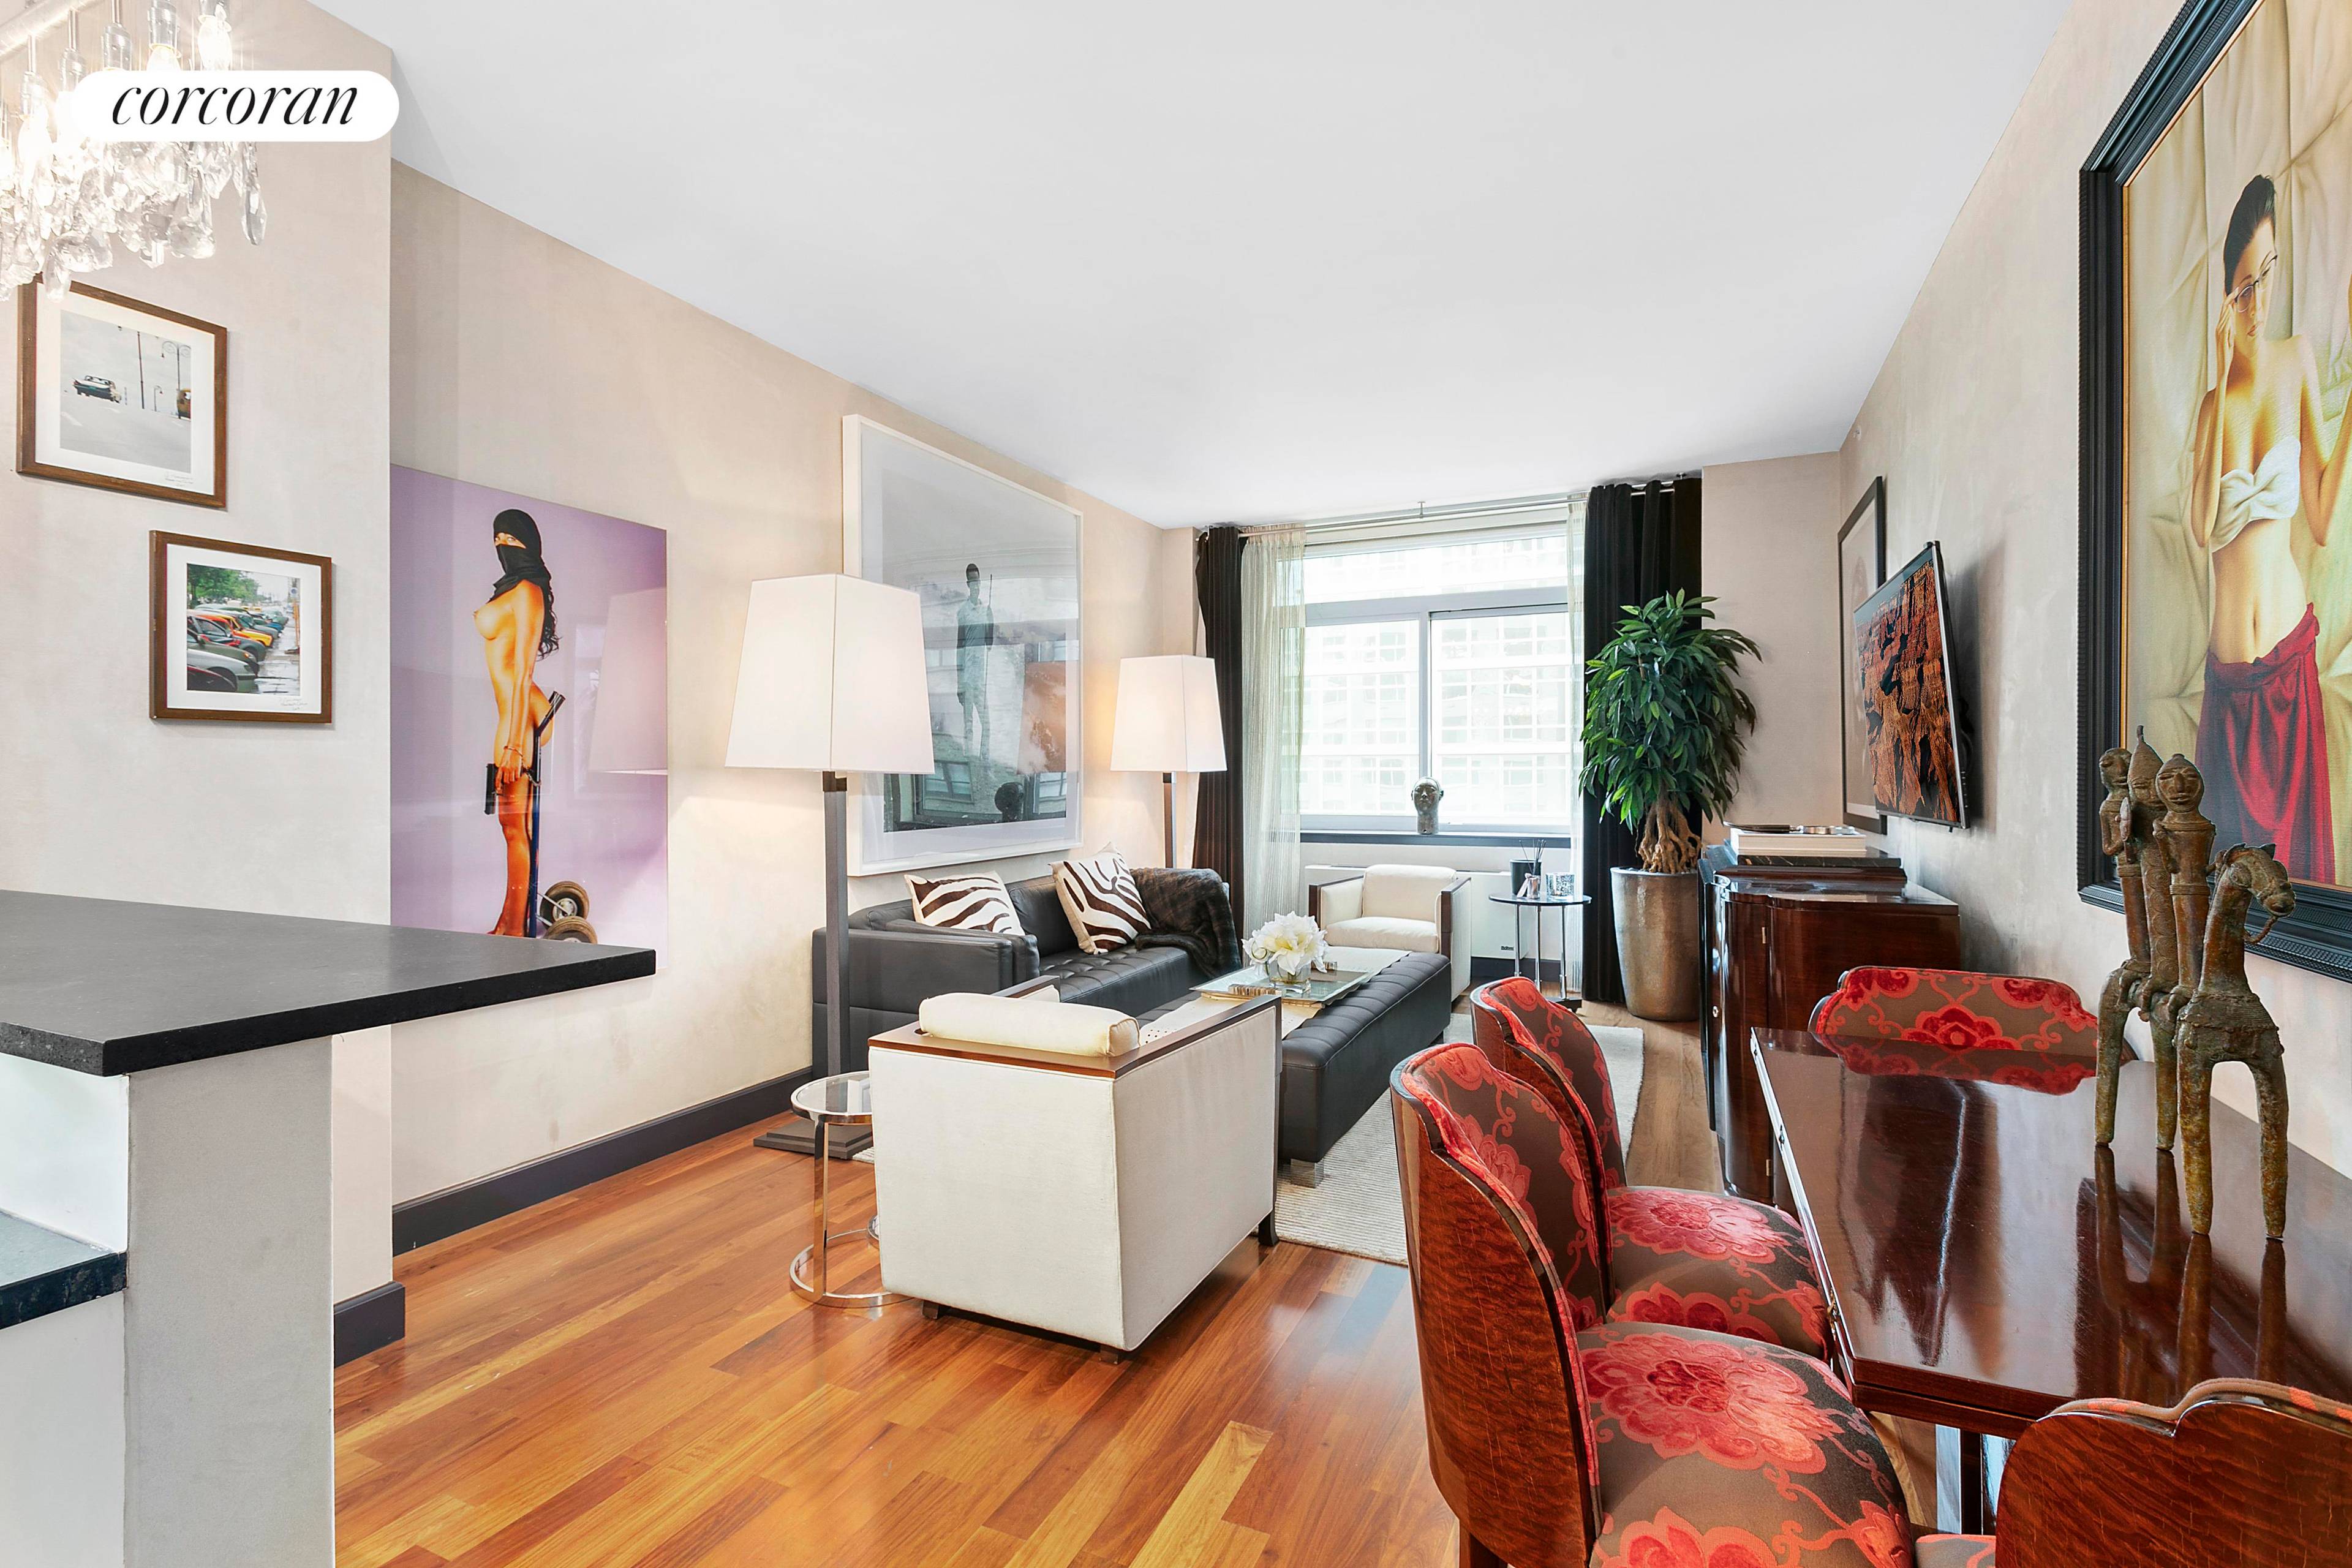 212 East 57th Street 5C Not to be missed Turn Key condo, this rarely available most desired 2 bedroom, 2, 5 bathroom condo with large terrace, is pin drop quiet ...